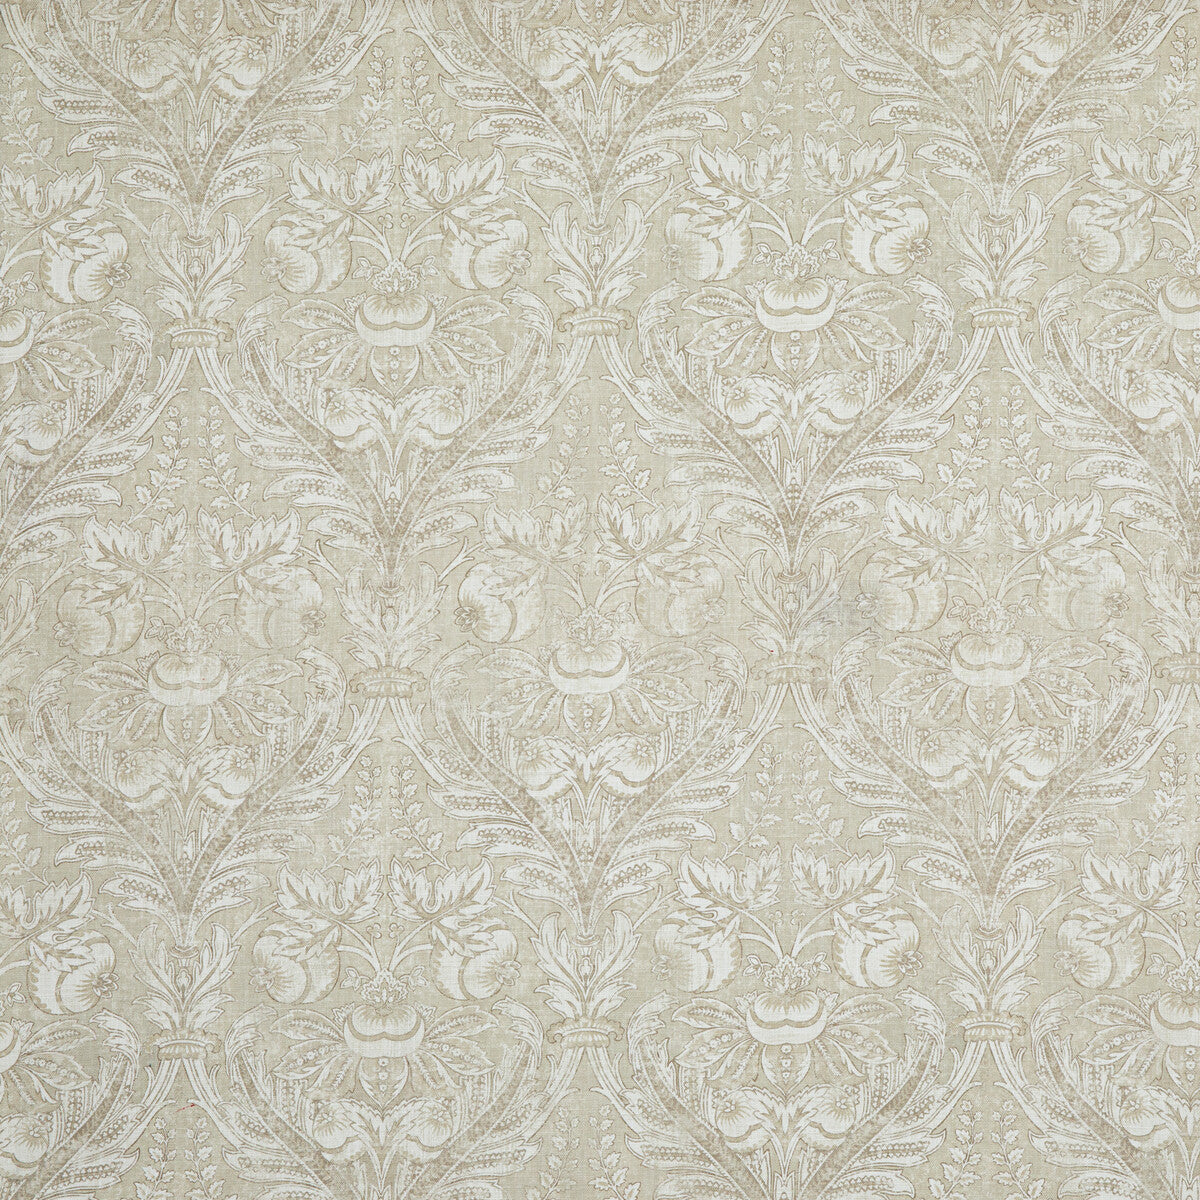 Lapura Damask fabric in dove color - pattern BP10828.3.0 - by G P &amp; J Baker in the Coromandel collection